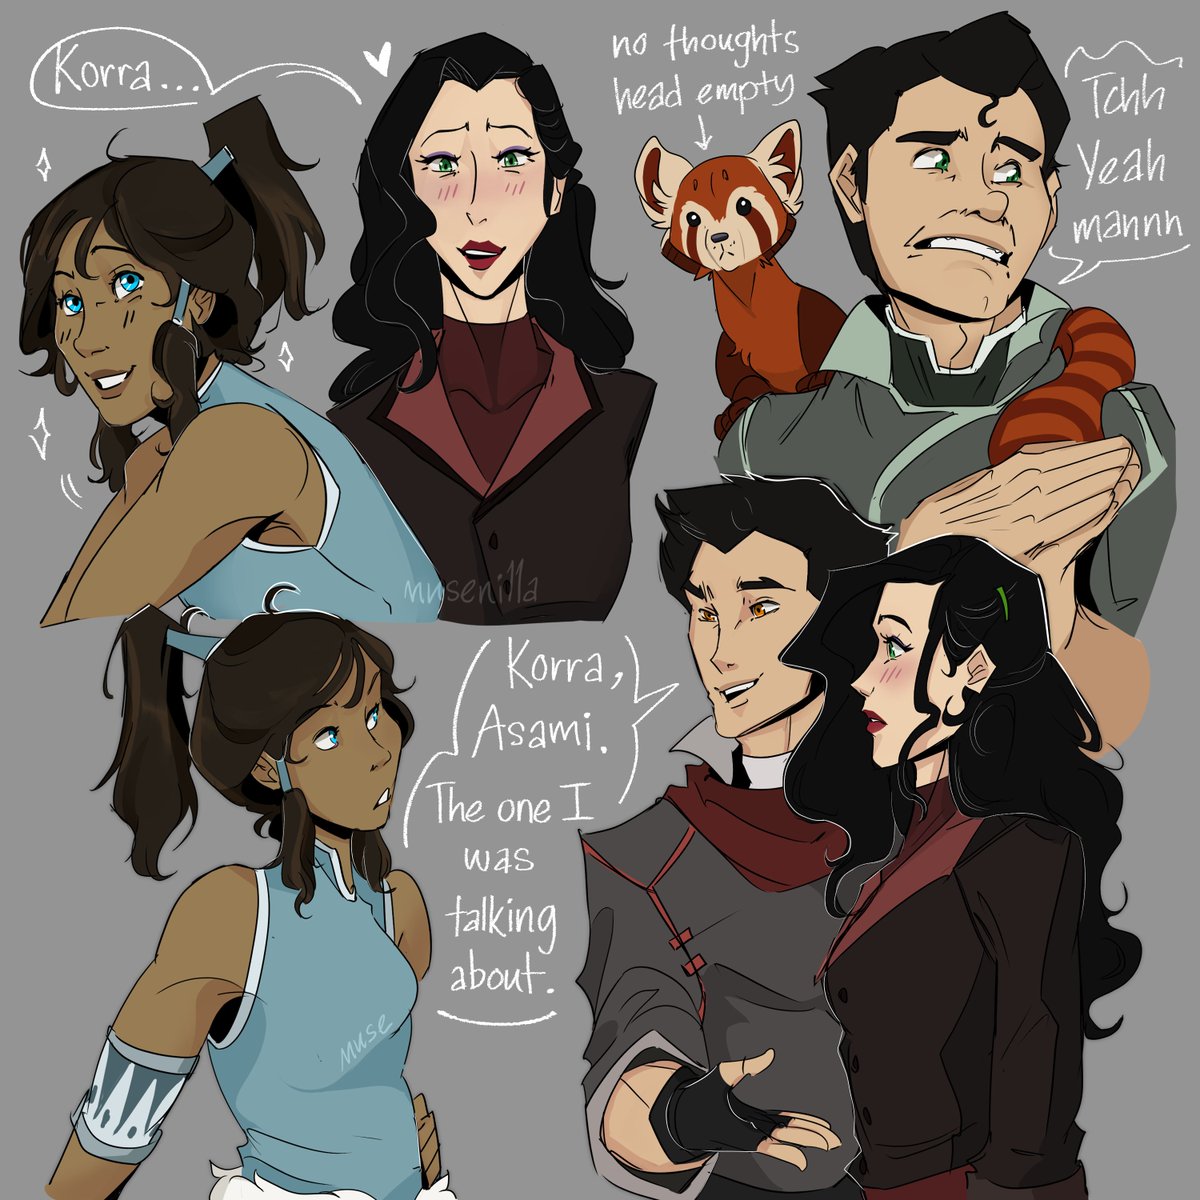 Drew out a bunch while watching tlok the other day 🌊 Korra’s hairstyle is weirdly satisfying to draw out help-

#thelegendofkorra #Korra #Asami #Bolin #Mako #korrasami #makorra #avatar #fanart #art